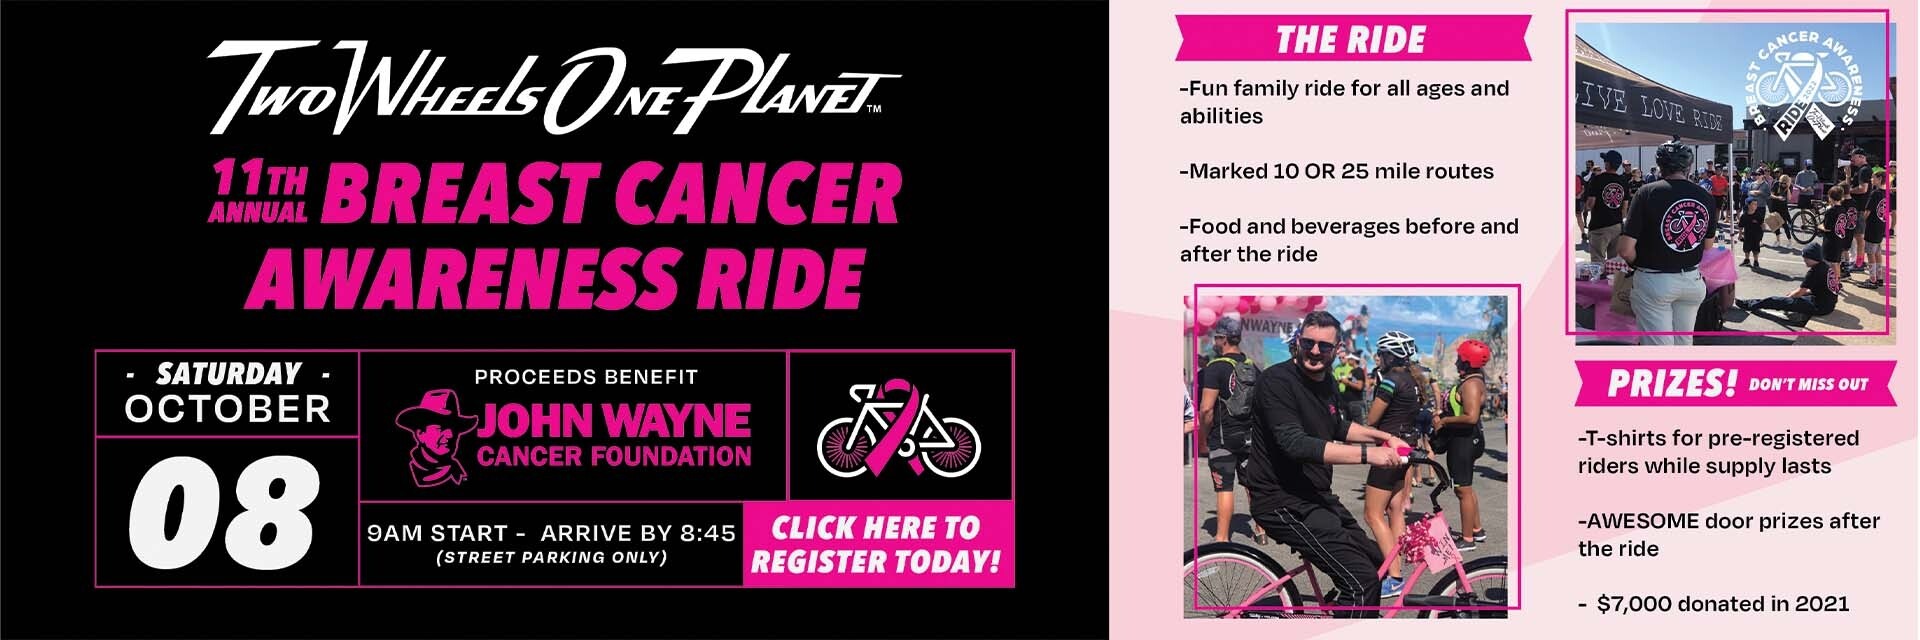 Two Wheels One Planet Breast Cancer Awareness Ride